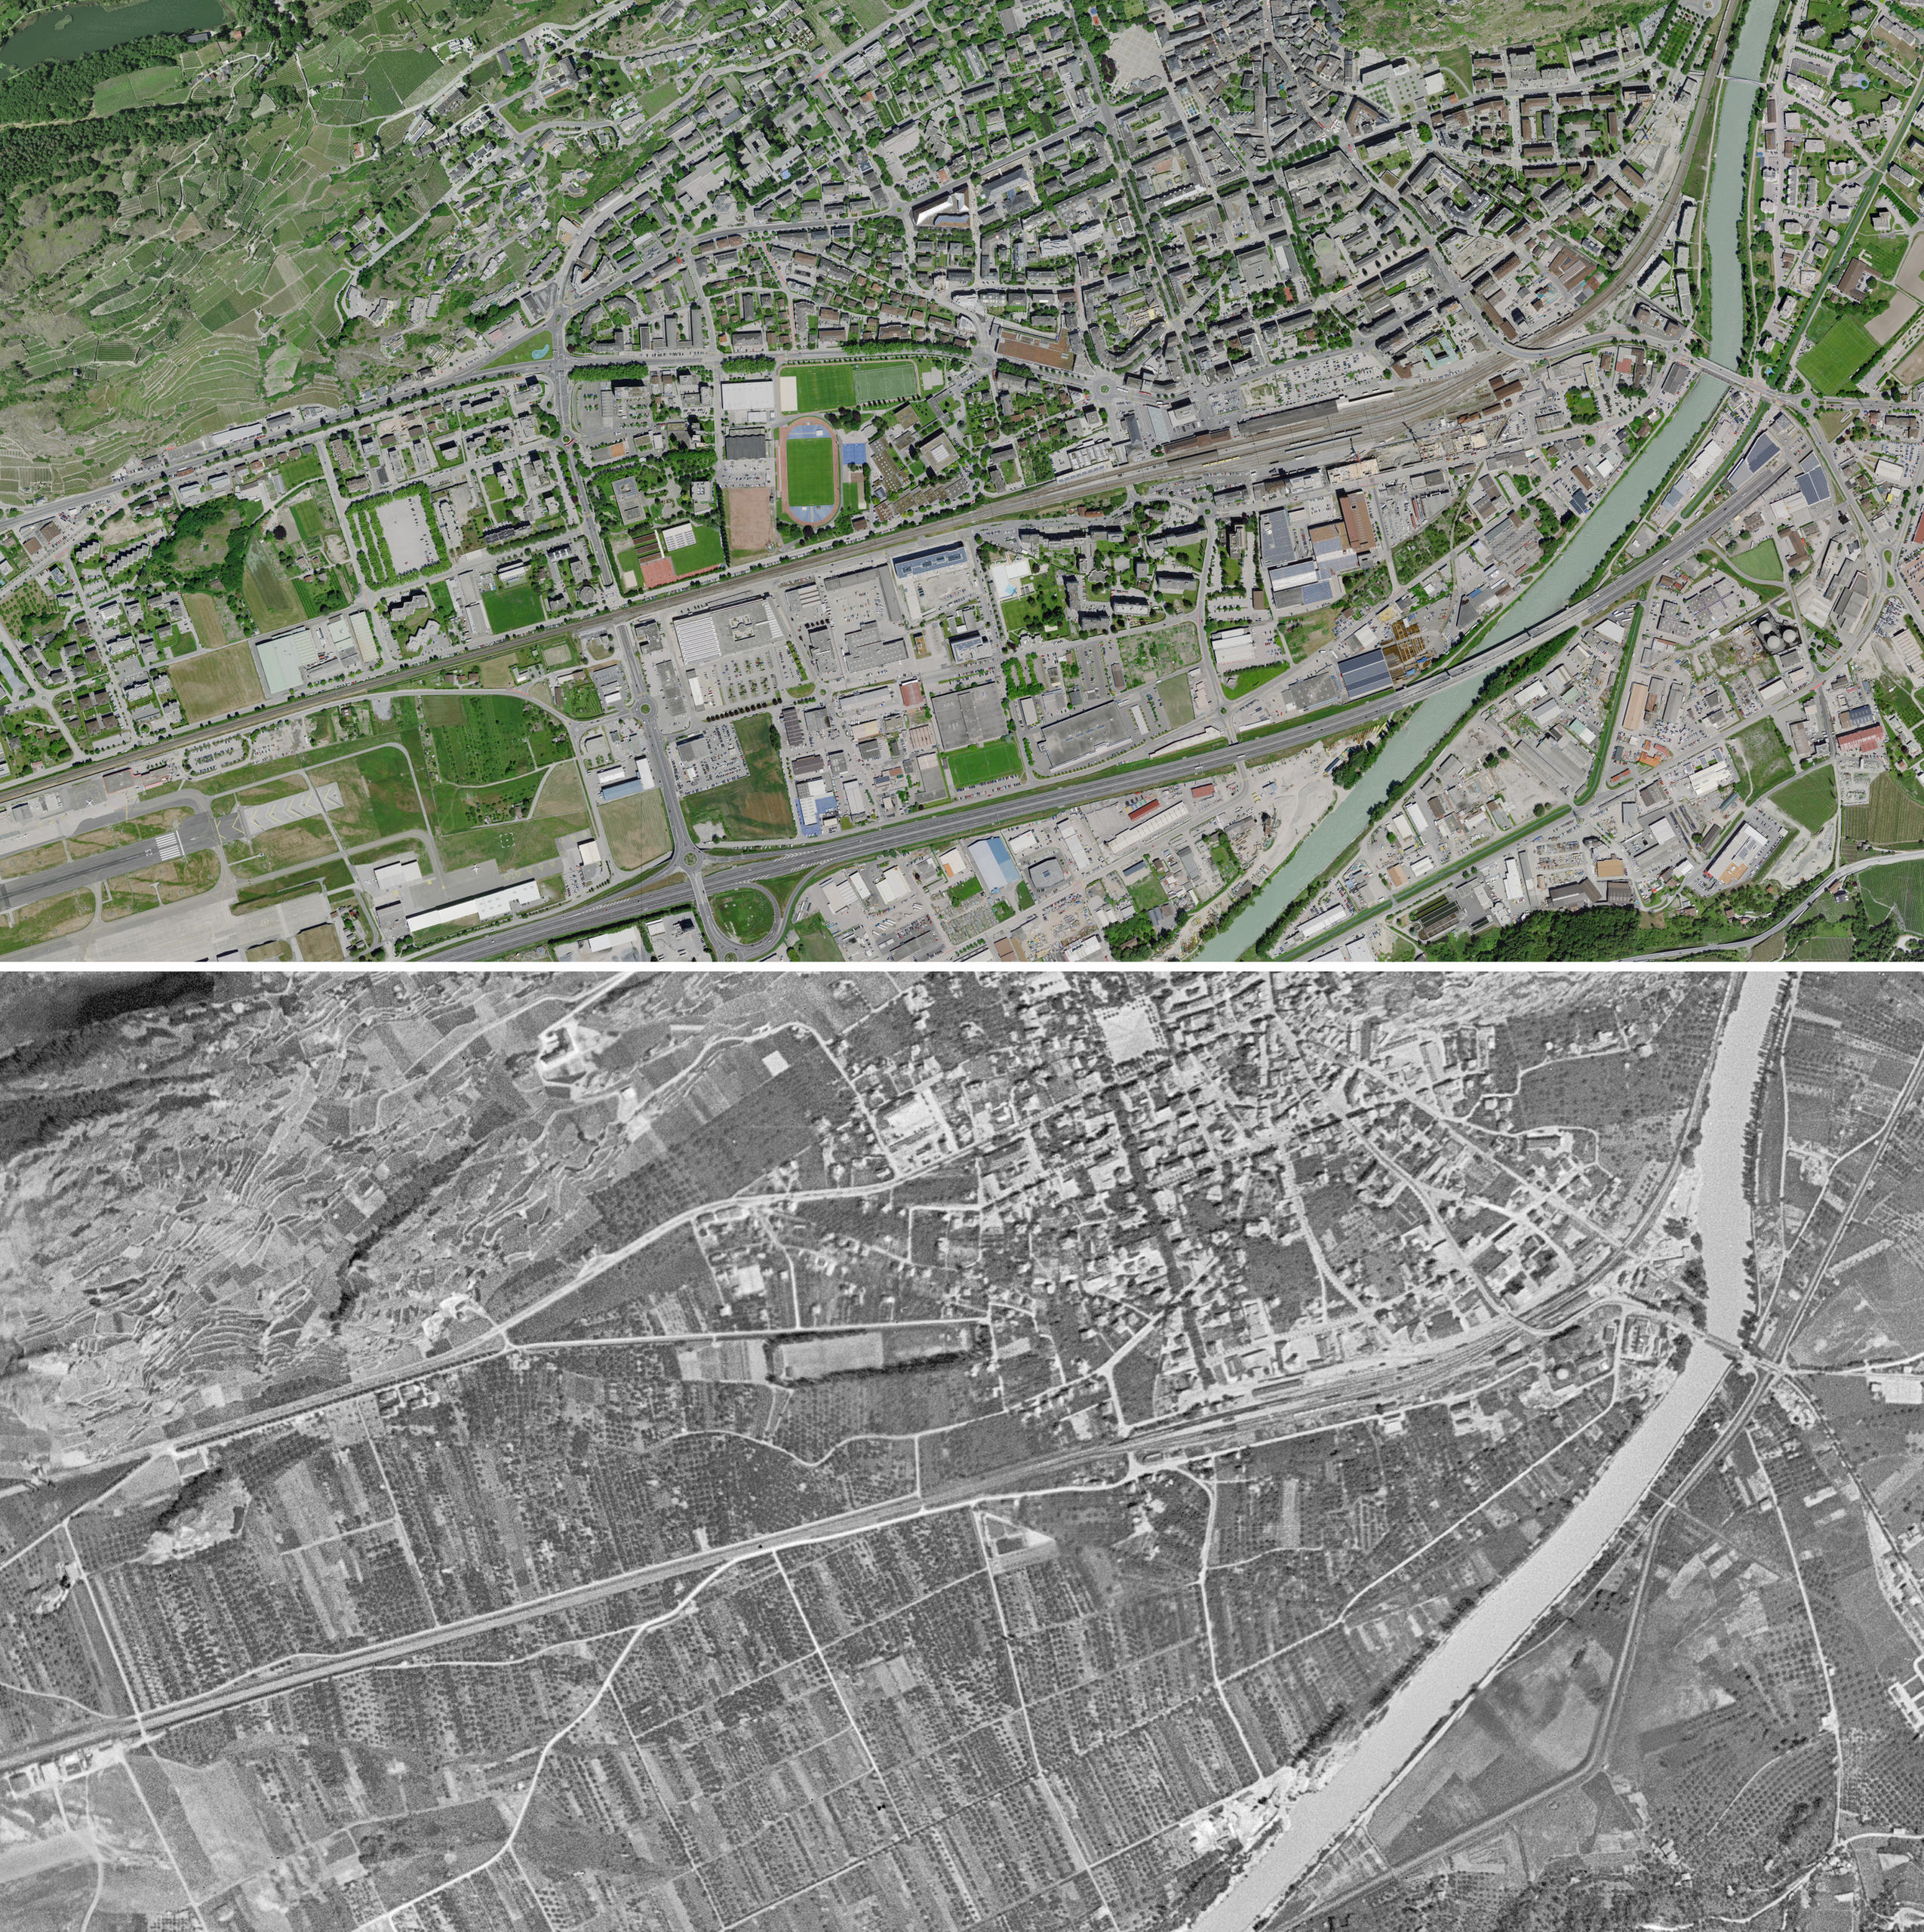 Aerial view of Sion above in 2017 and below in 1946